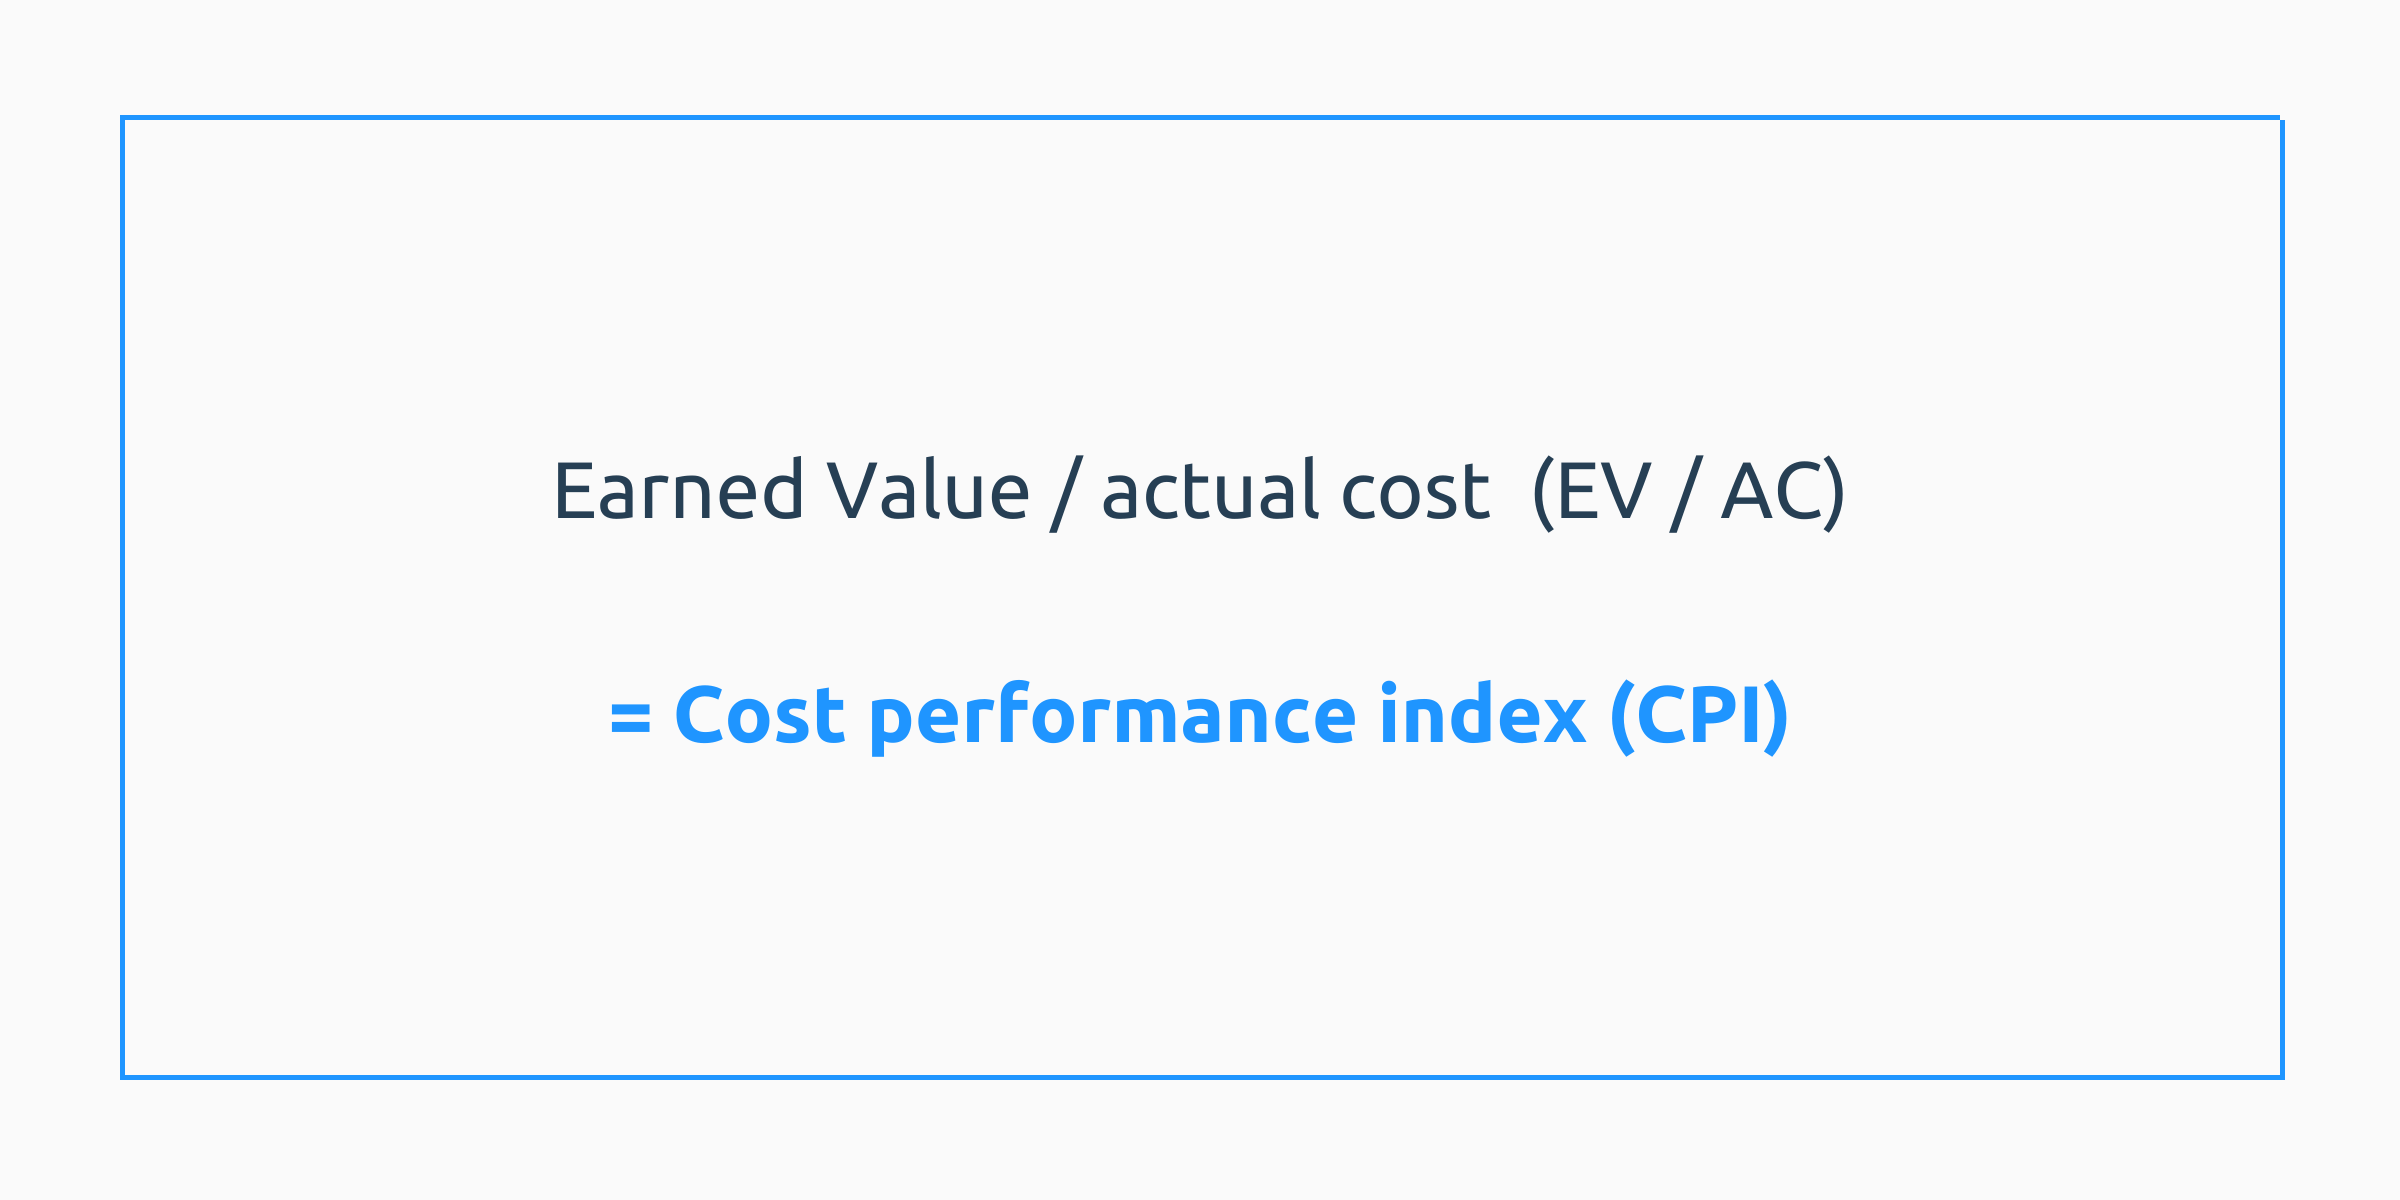 Earned value/actual cost (EV/AC) = Cost performance index (CPI)